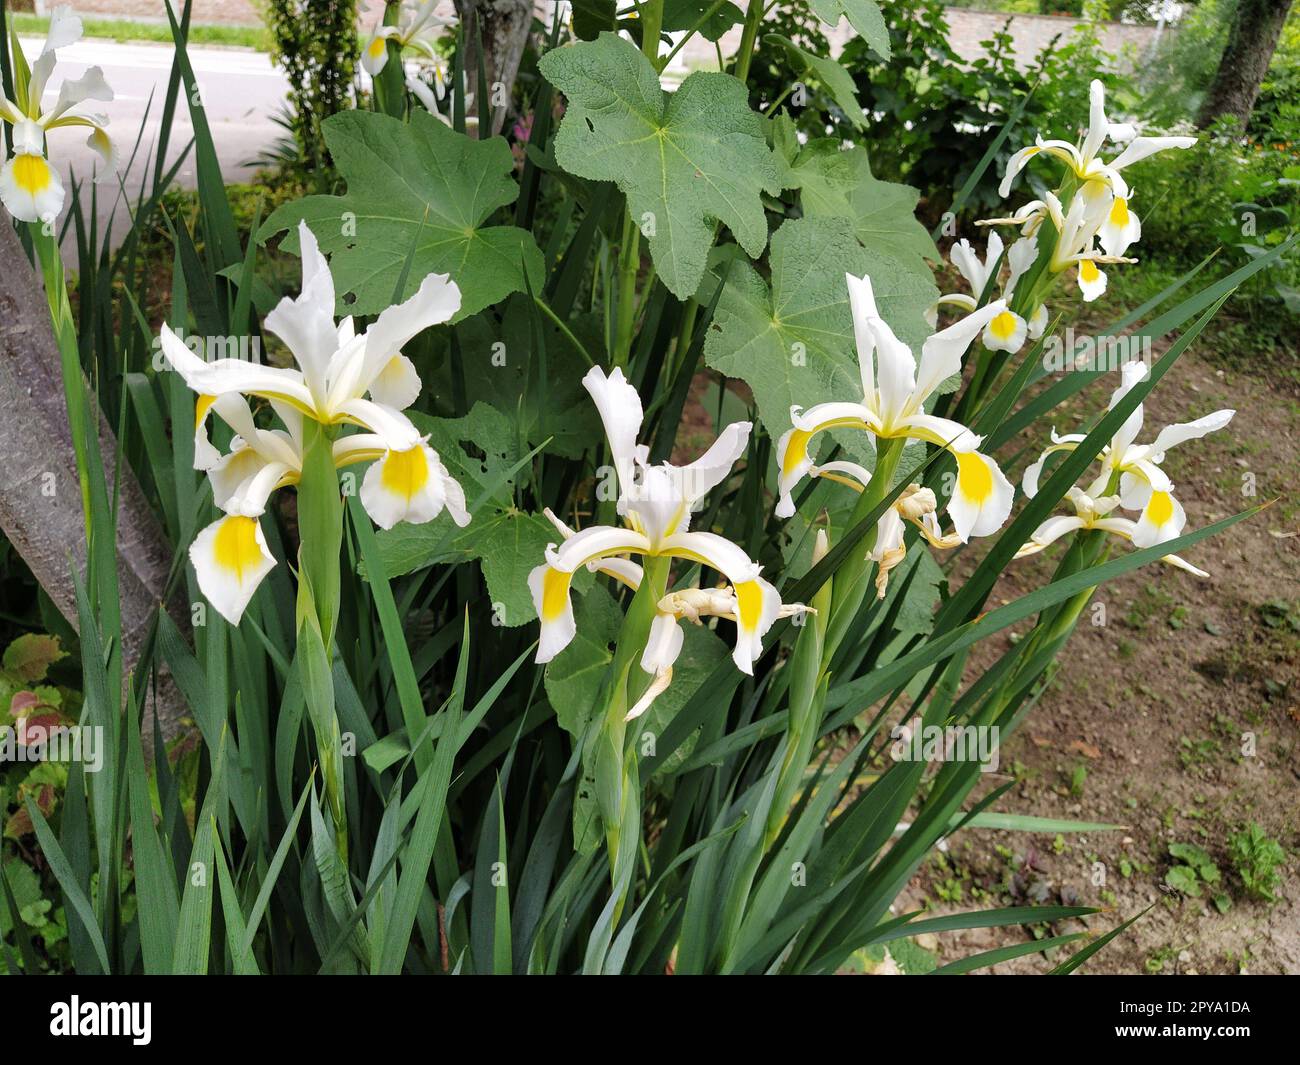 White irises with a yellow middle of the flower. Flowerbed in the garden with tall beautiful plants. Stock Photo